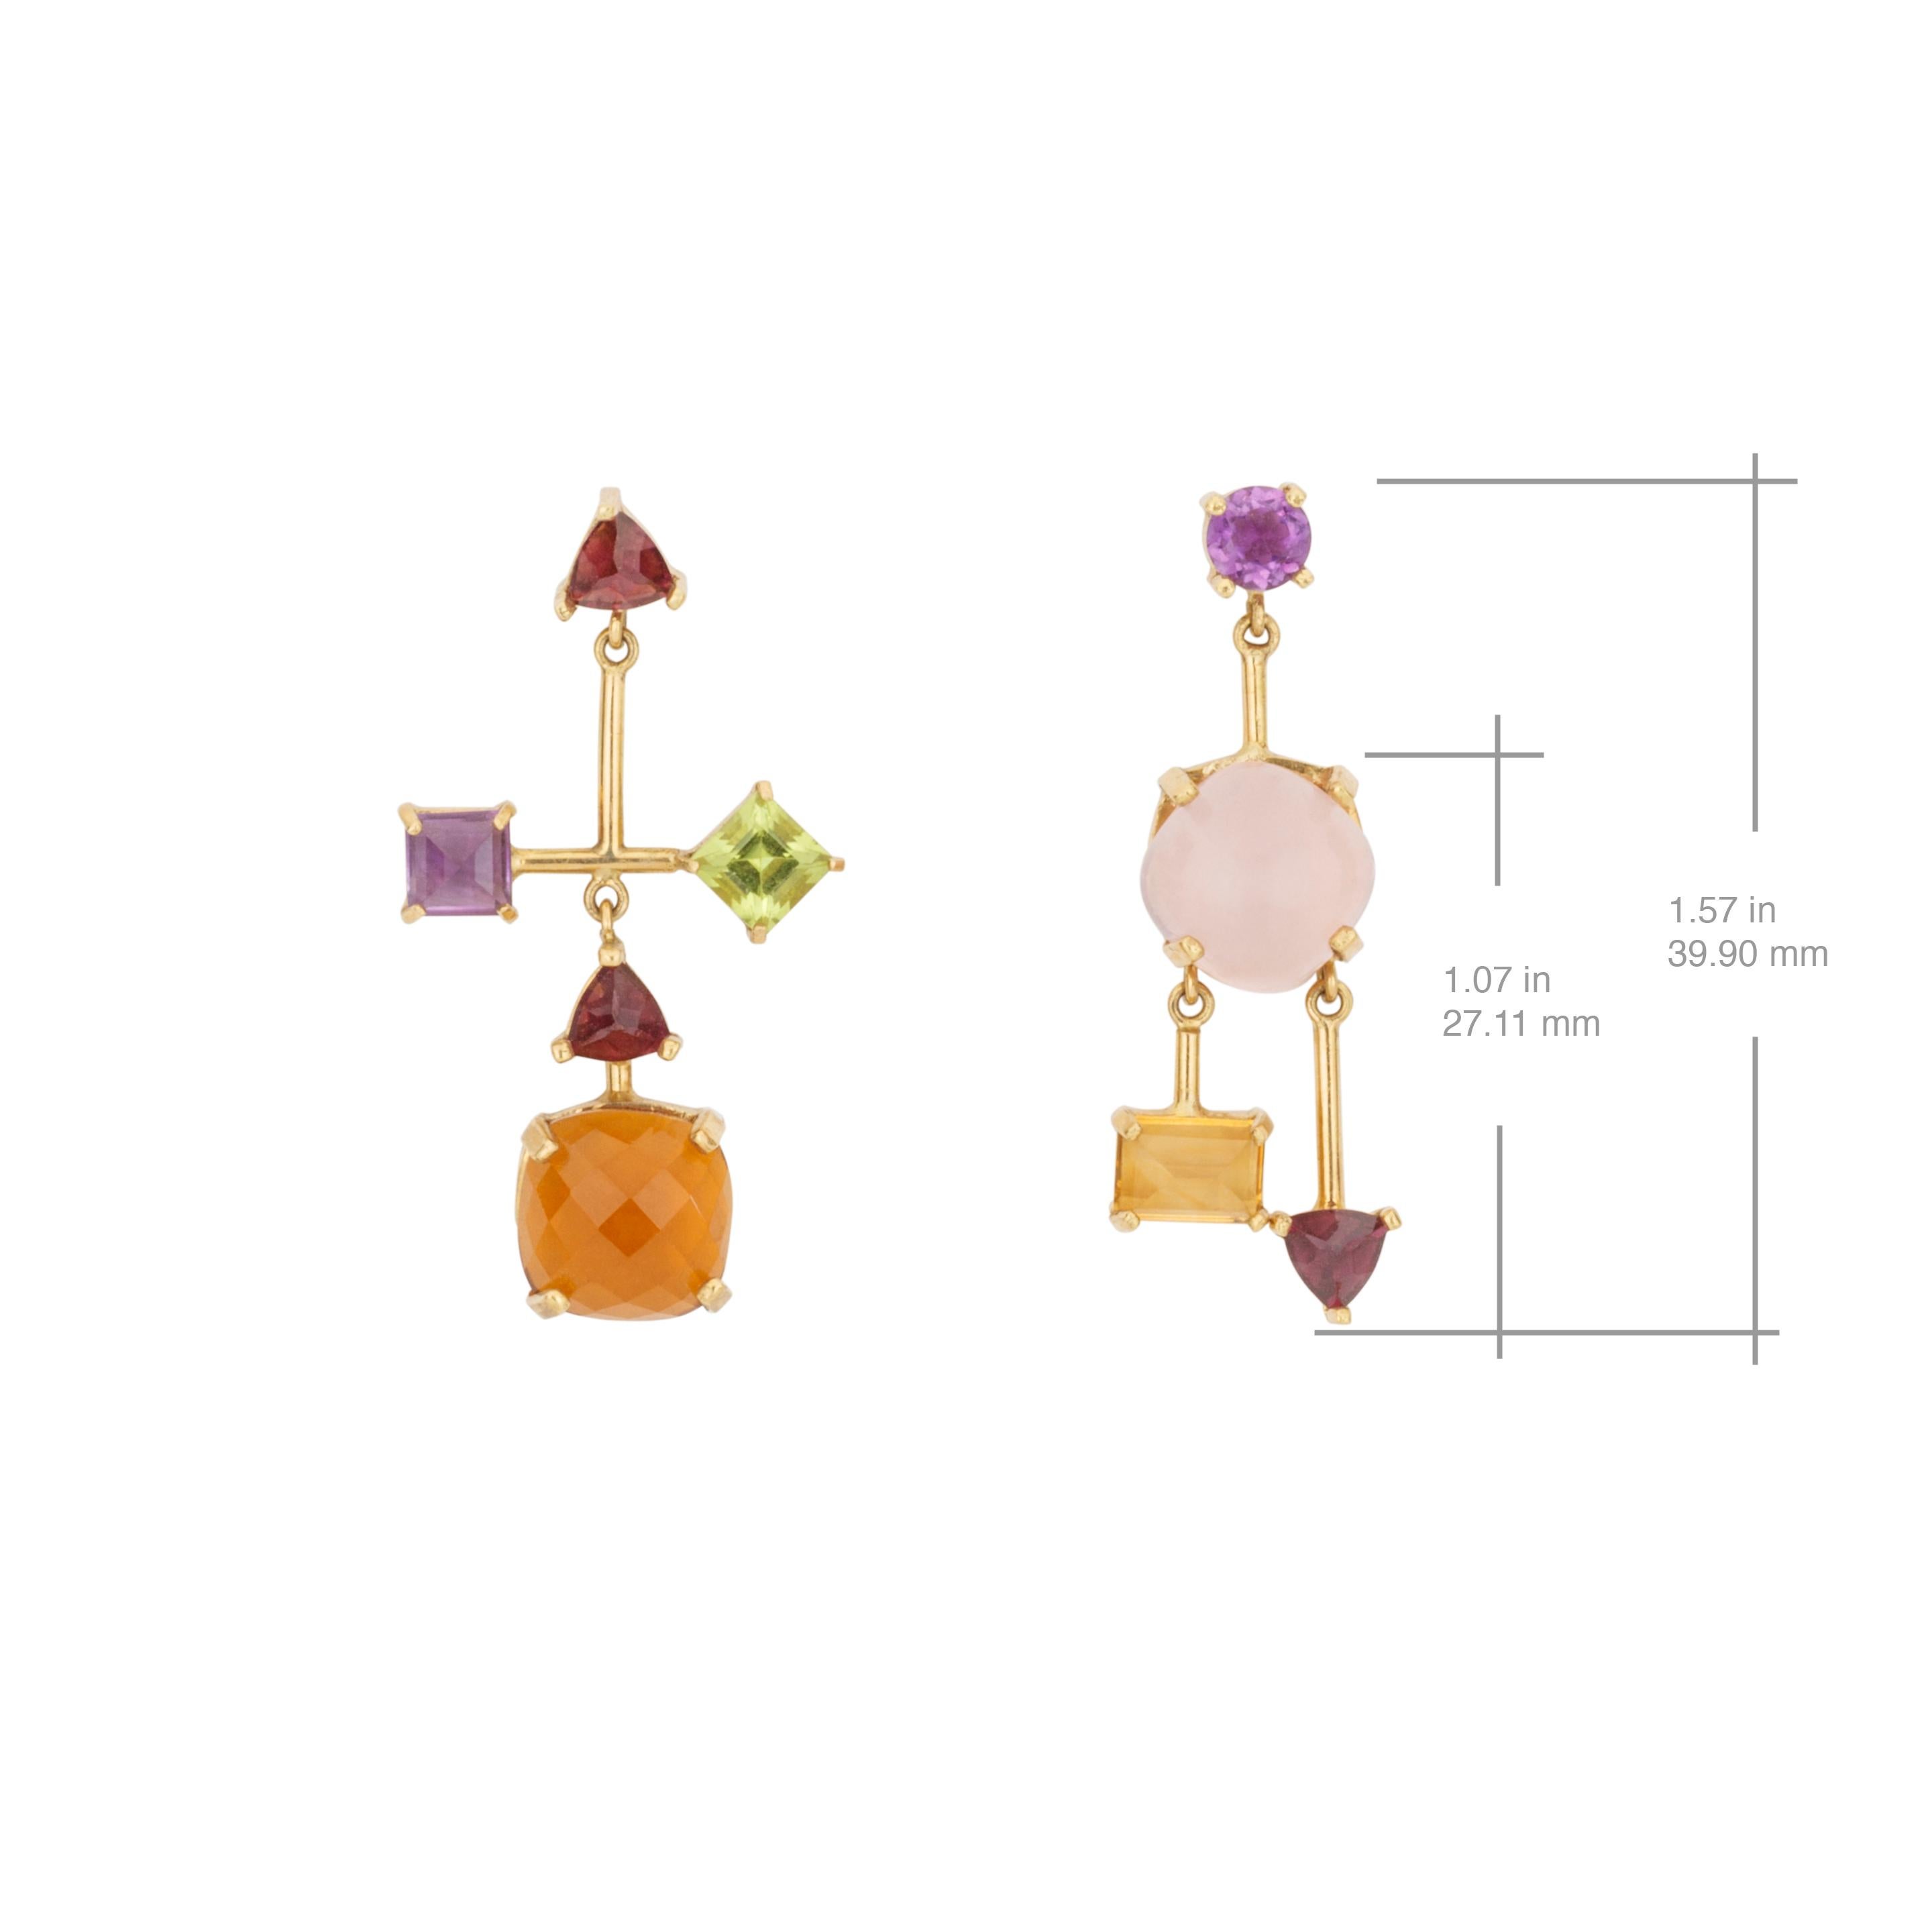 This contemporary multi gemstone asymmetrical 18 karat yellow gold dangle earrings, combine Natural Rose Quartz, Amethyst, Yellow and Green Topaz and Garnet on an unexpected geometrical way. 
The balance of the earrings' asymmetry is achieved by